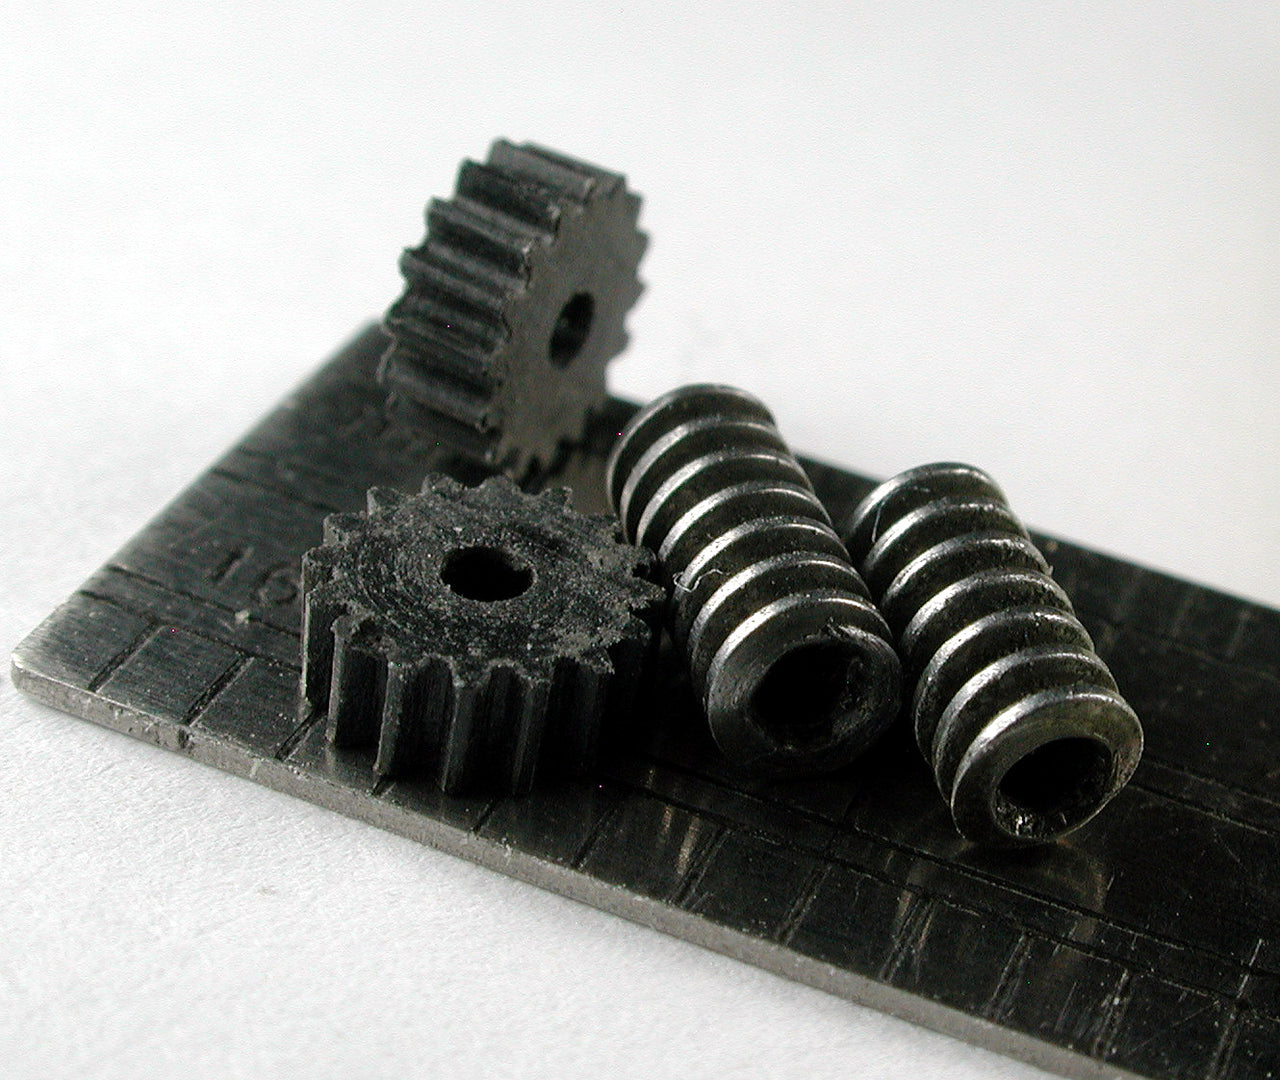 Worm Gear, 0.3mod x 16 Teeth x 5.4mm OD x 1.5mm Bore, Delrin, KIT with worms